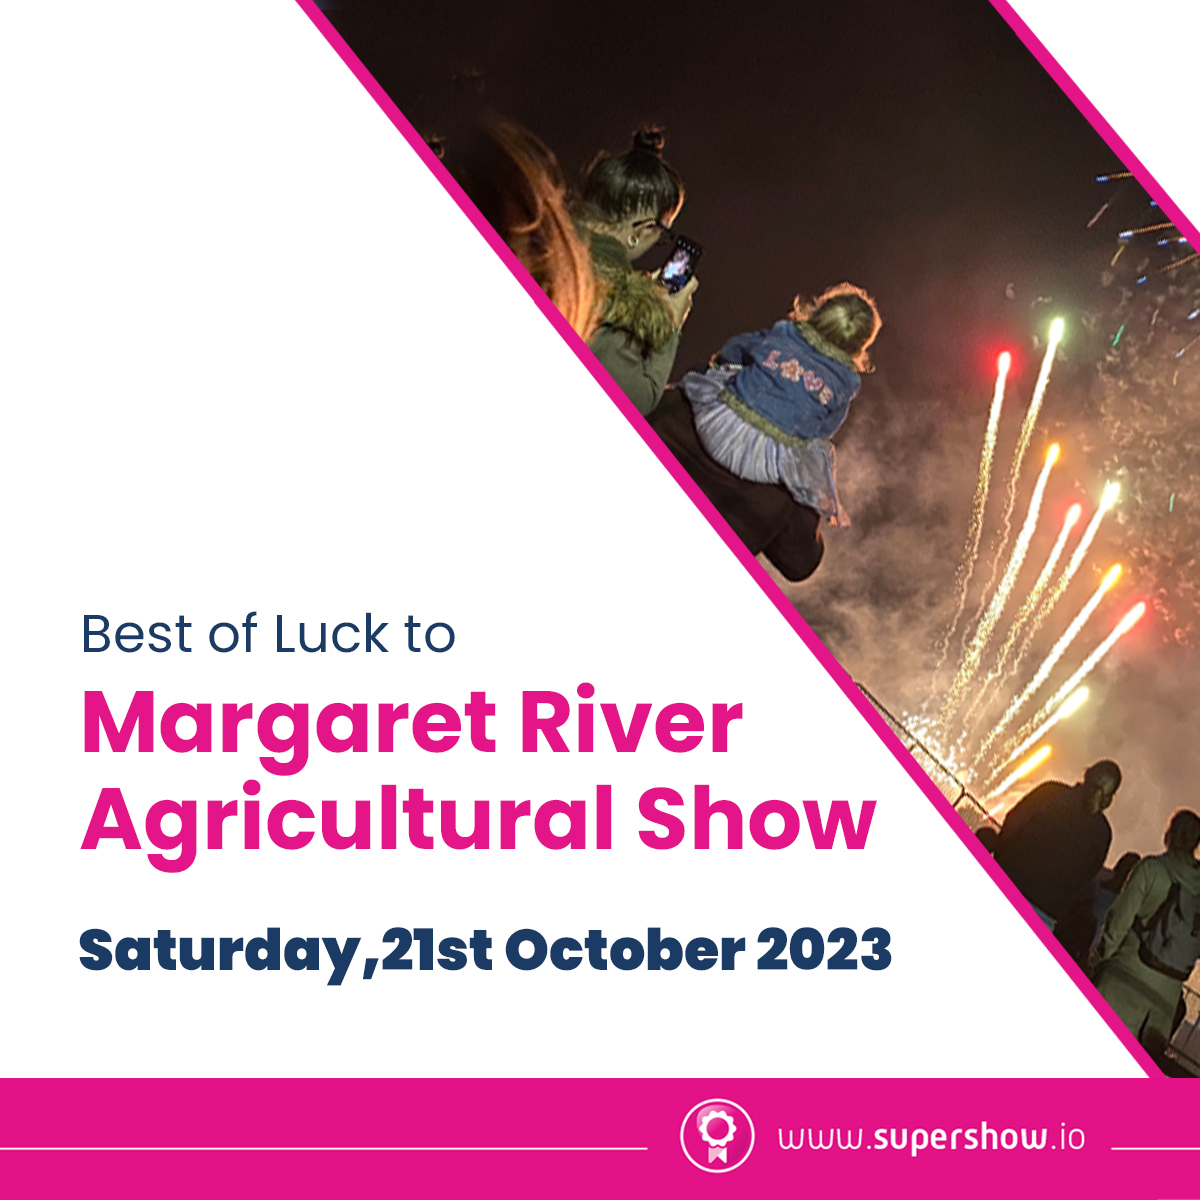 Wishing our client Margaret River Show every deserved success for their show taking place this weekend! Check it out at margaretrivershow.com #asa #agshowsaustralia #agrishows23 #agrishow #supershow #showmanagement #EventManagementPlatform #margaretrivershow